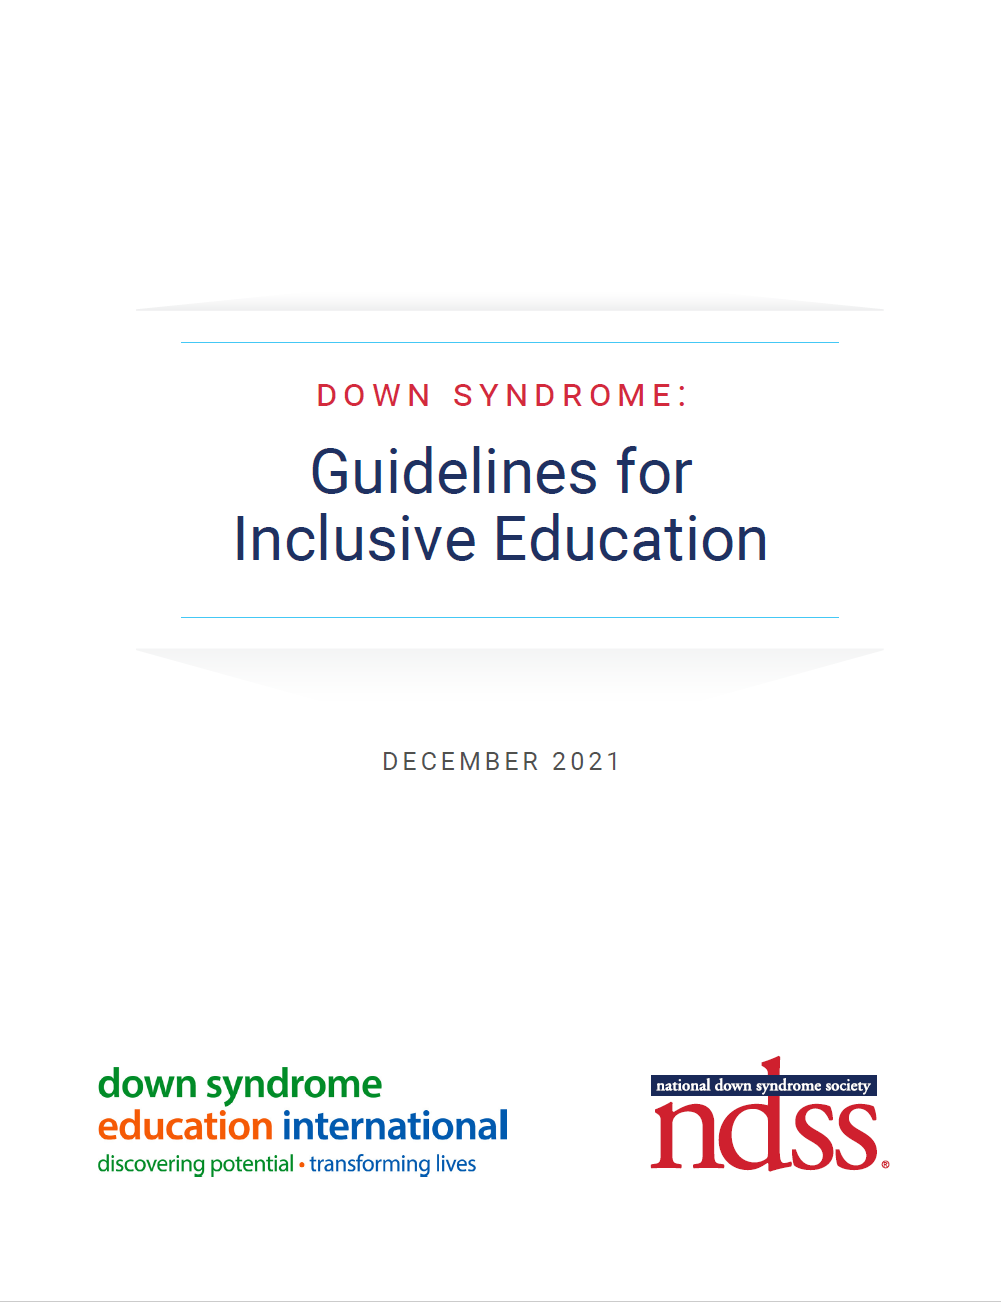 An image of the cover of Down Syndrome: Guidelines for Inclusive Education.